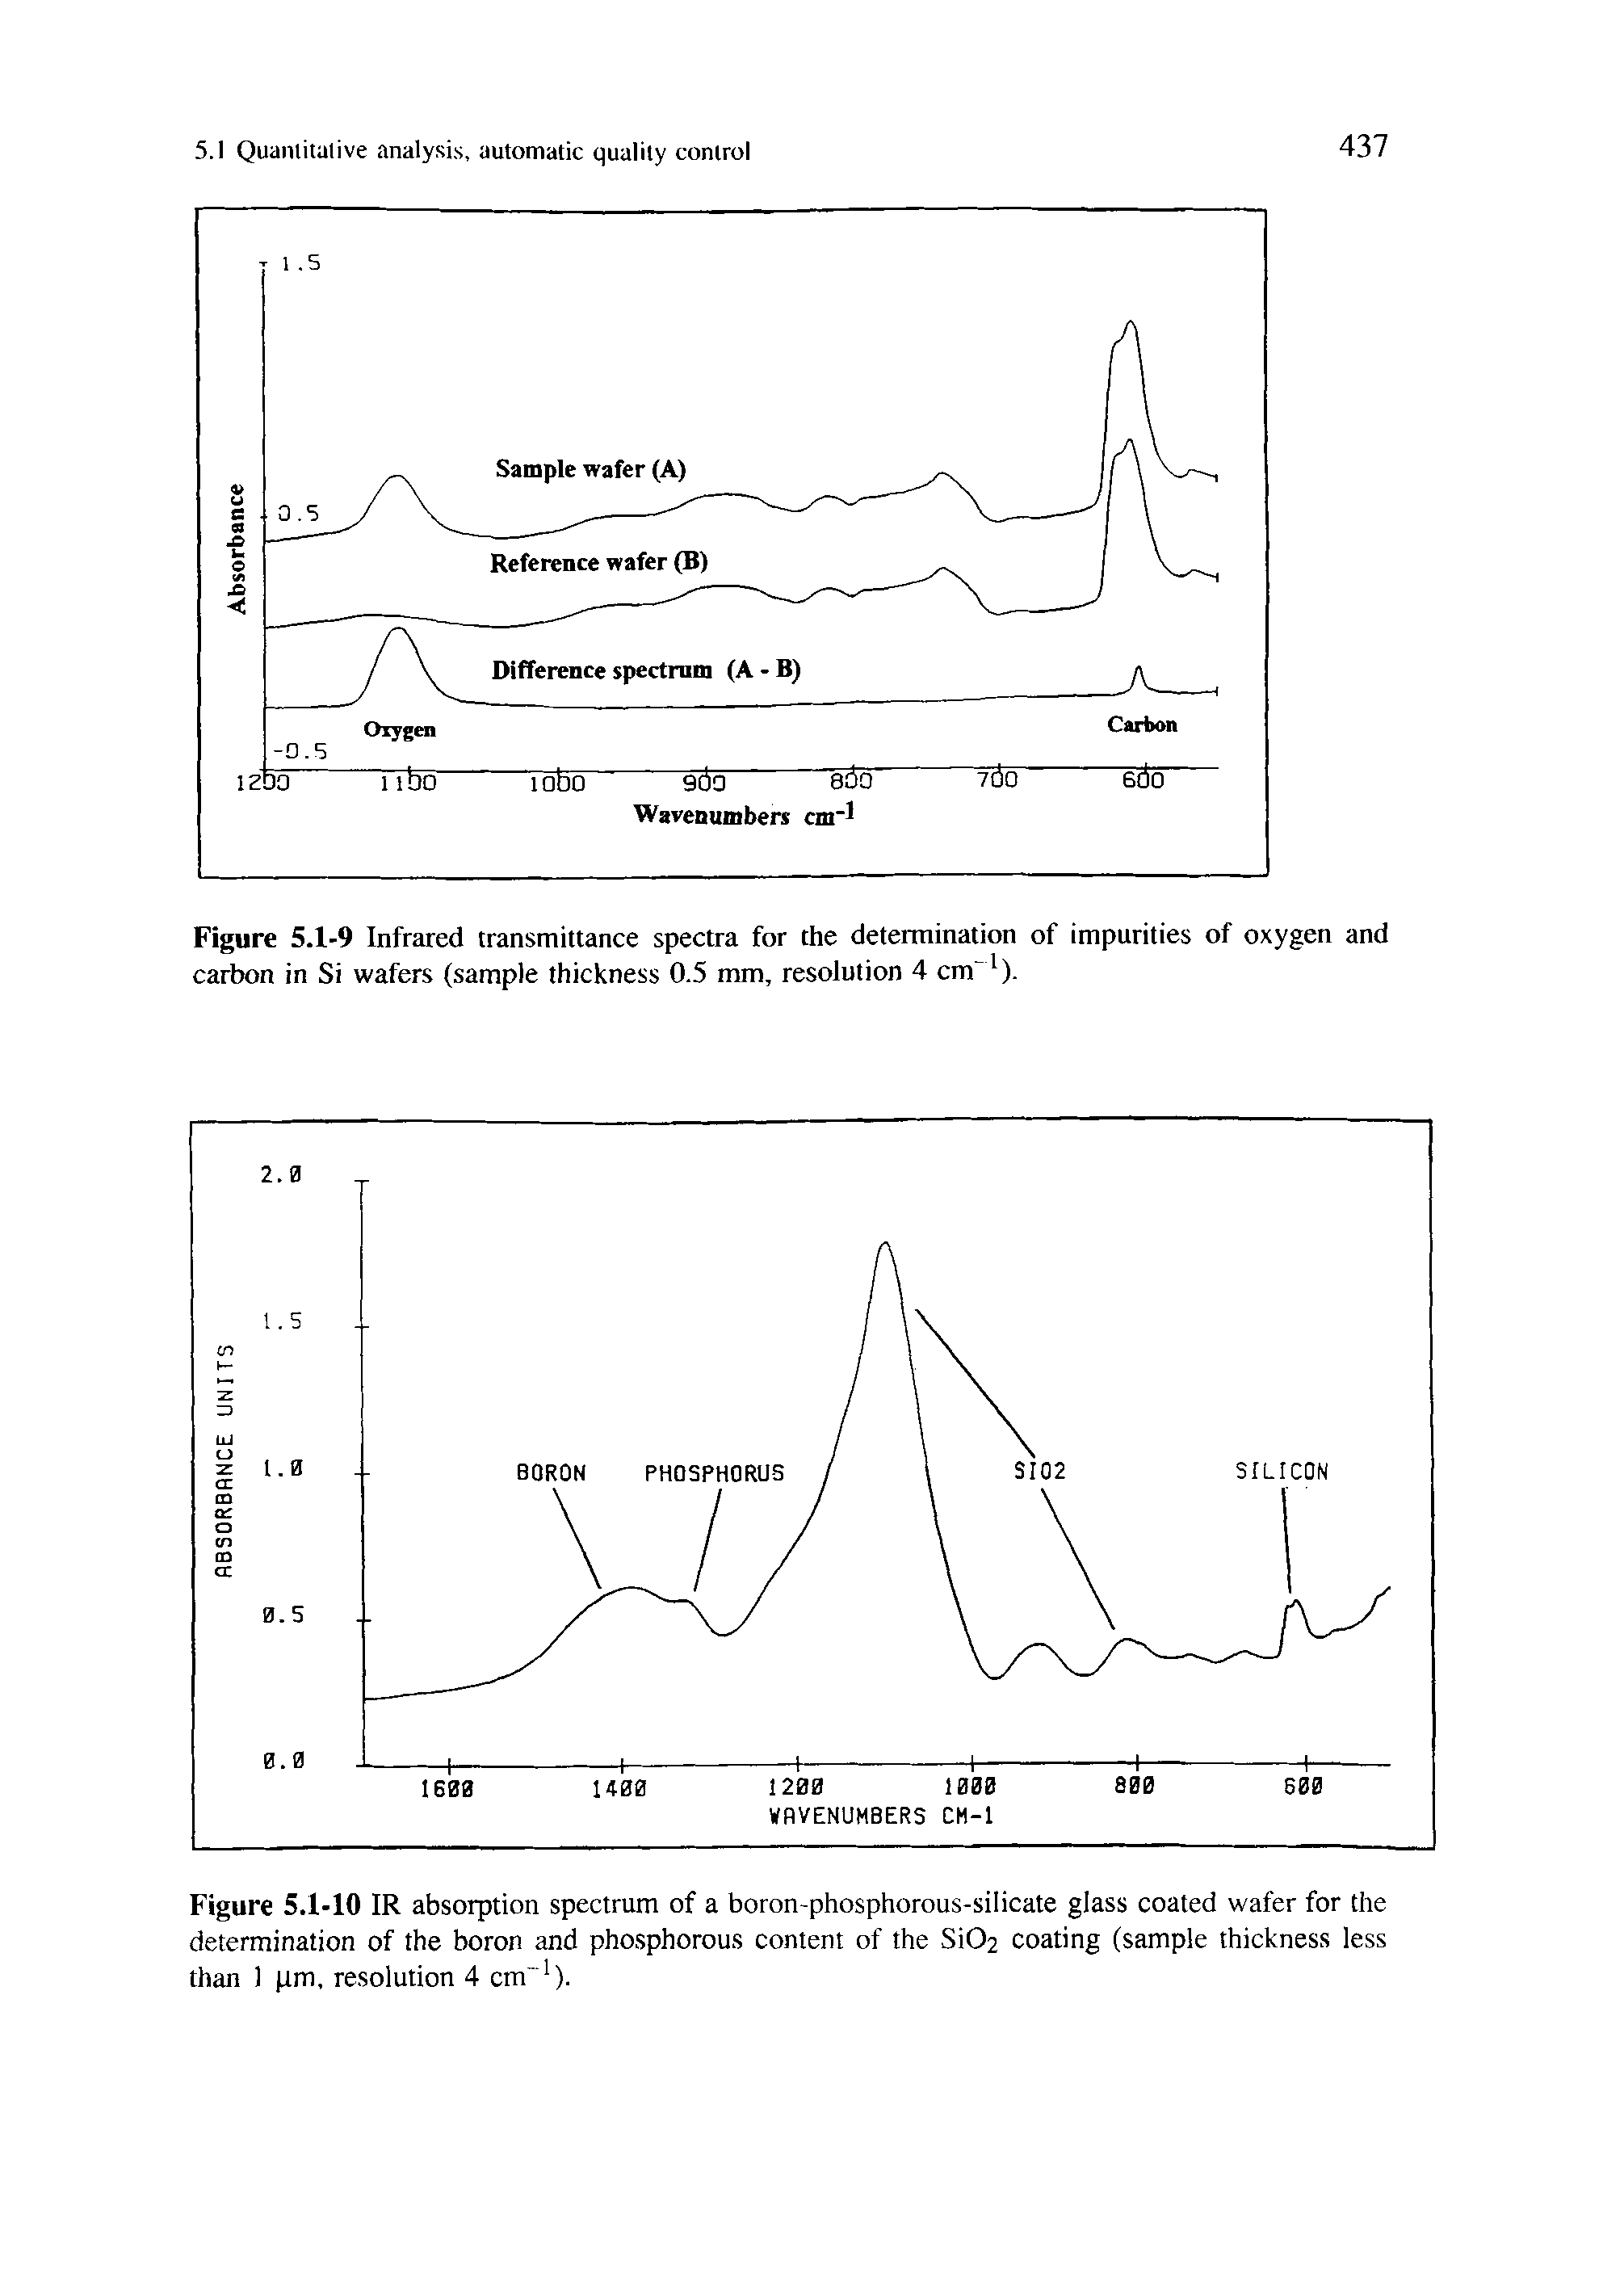 Figure 5.1-10 IR absorption spectrum of a boron-phosphorous-silicate glass coated wafer for the determination of the boron and phosphorous content of the Si02 coating (sample thickness less than 1 pm, resolution 4 cm ).